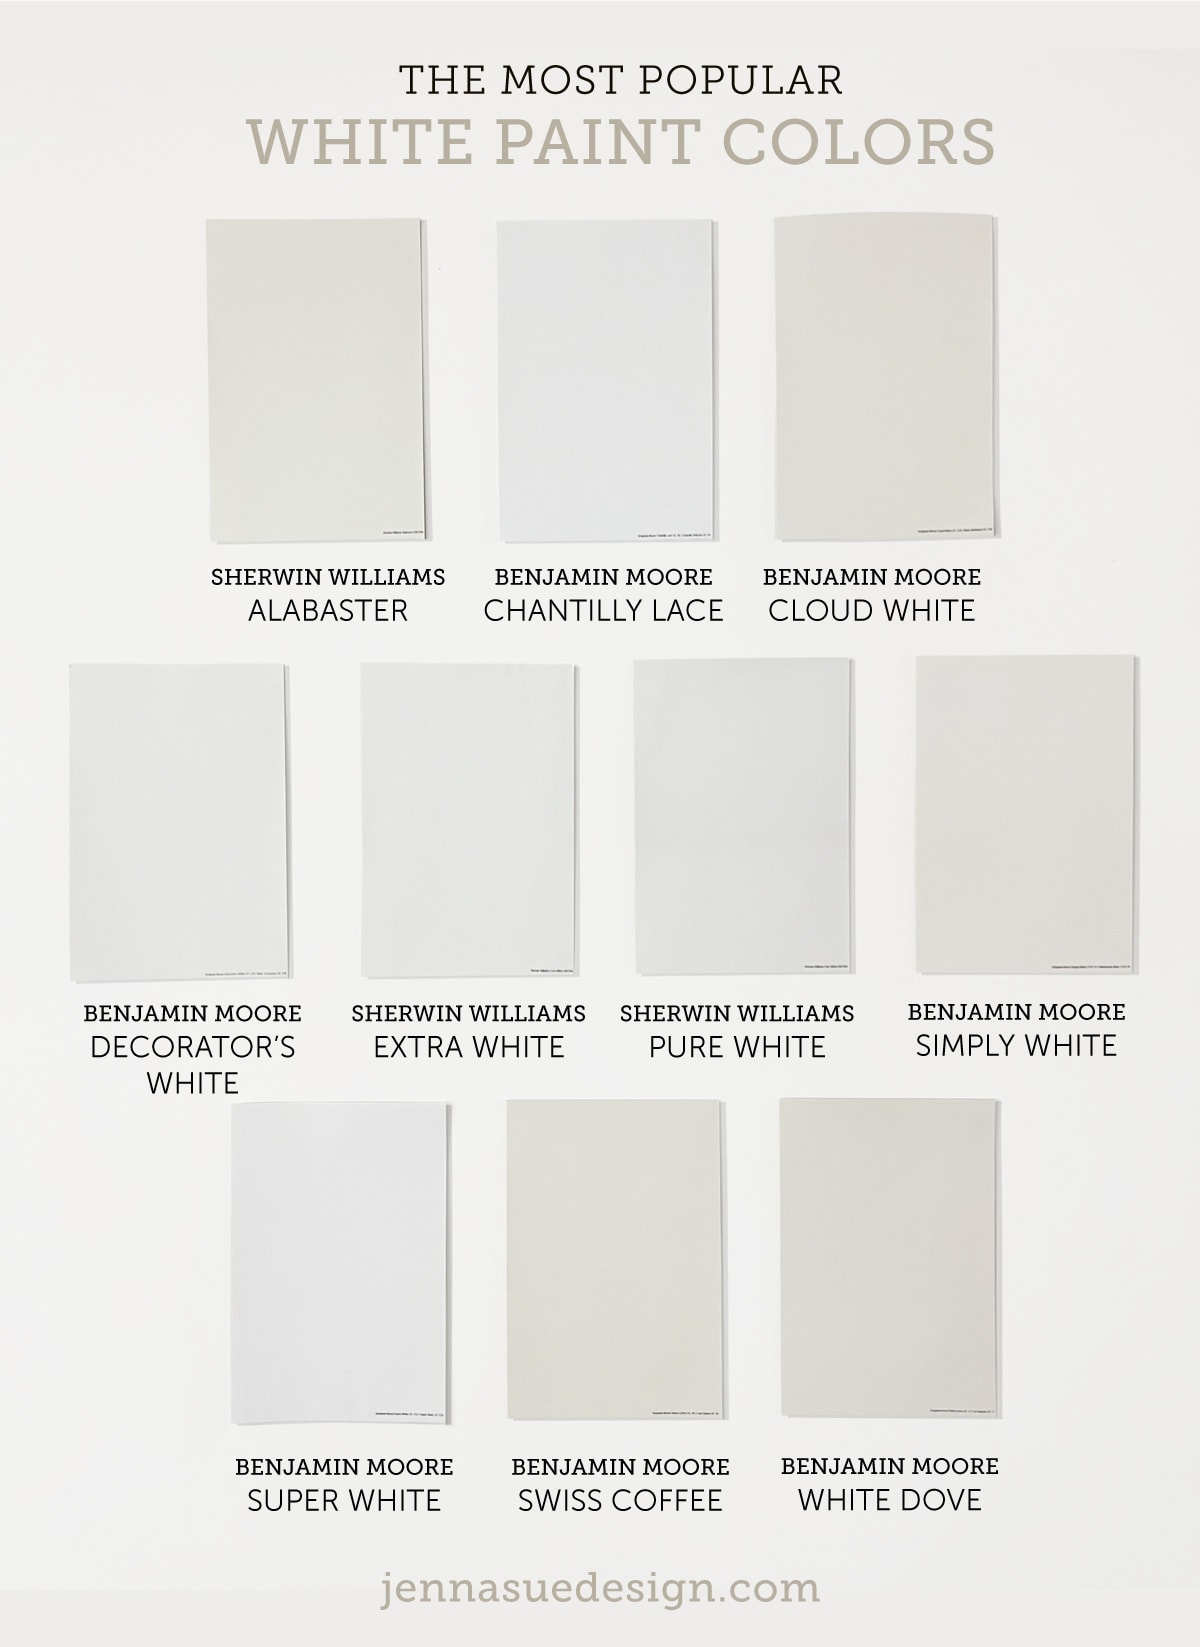 The Best White Paint Colors for Interiors - The Quick Journey